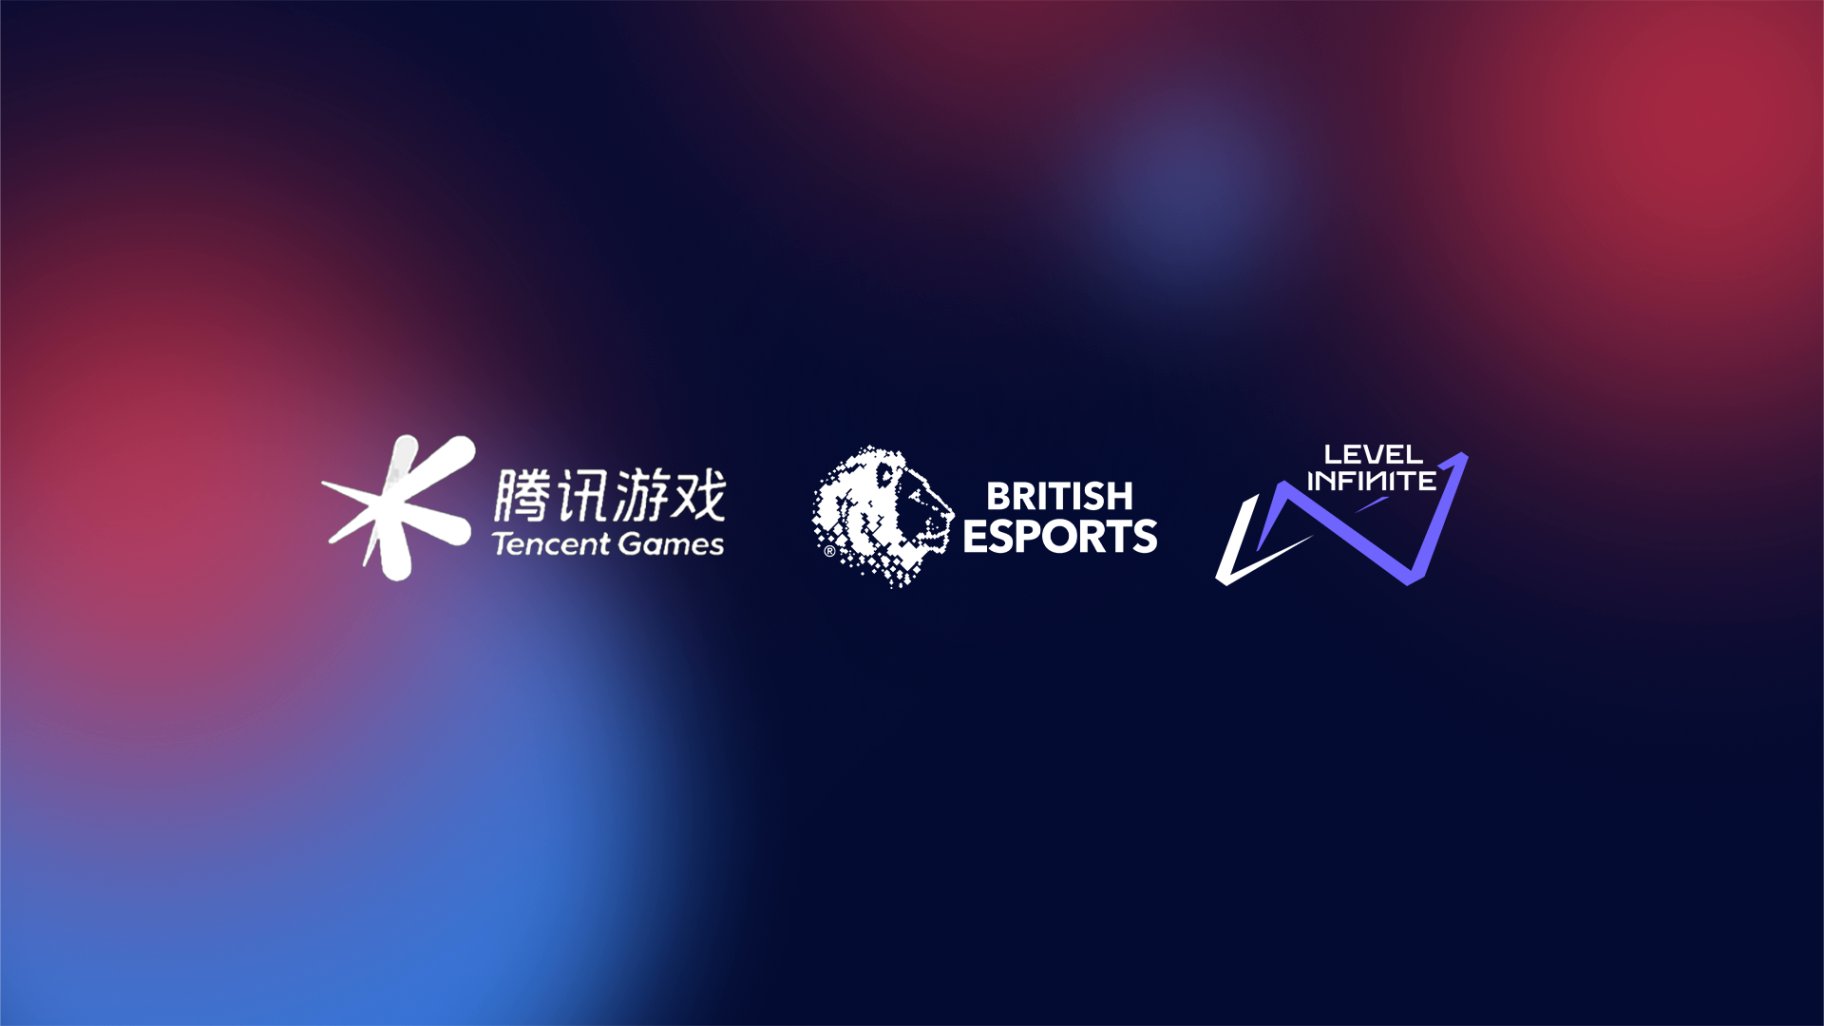 British Esports secures education partnership with Tencent Games’ Level Infinite